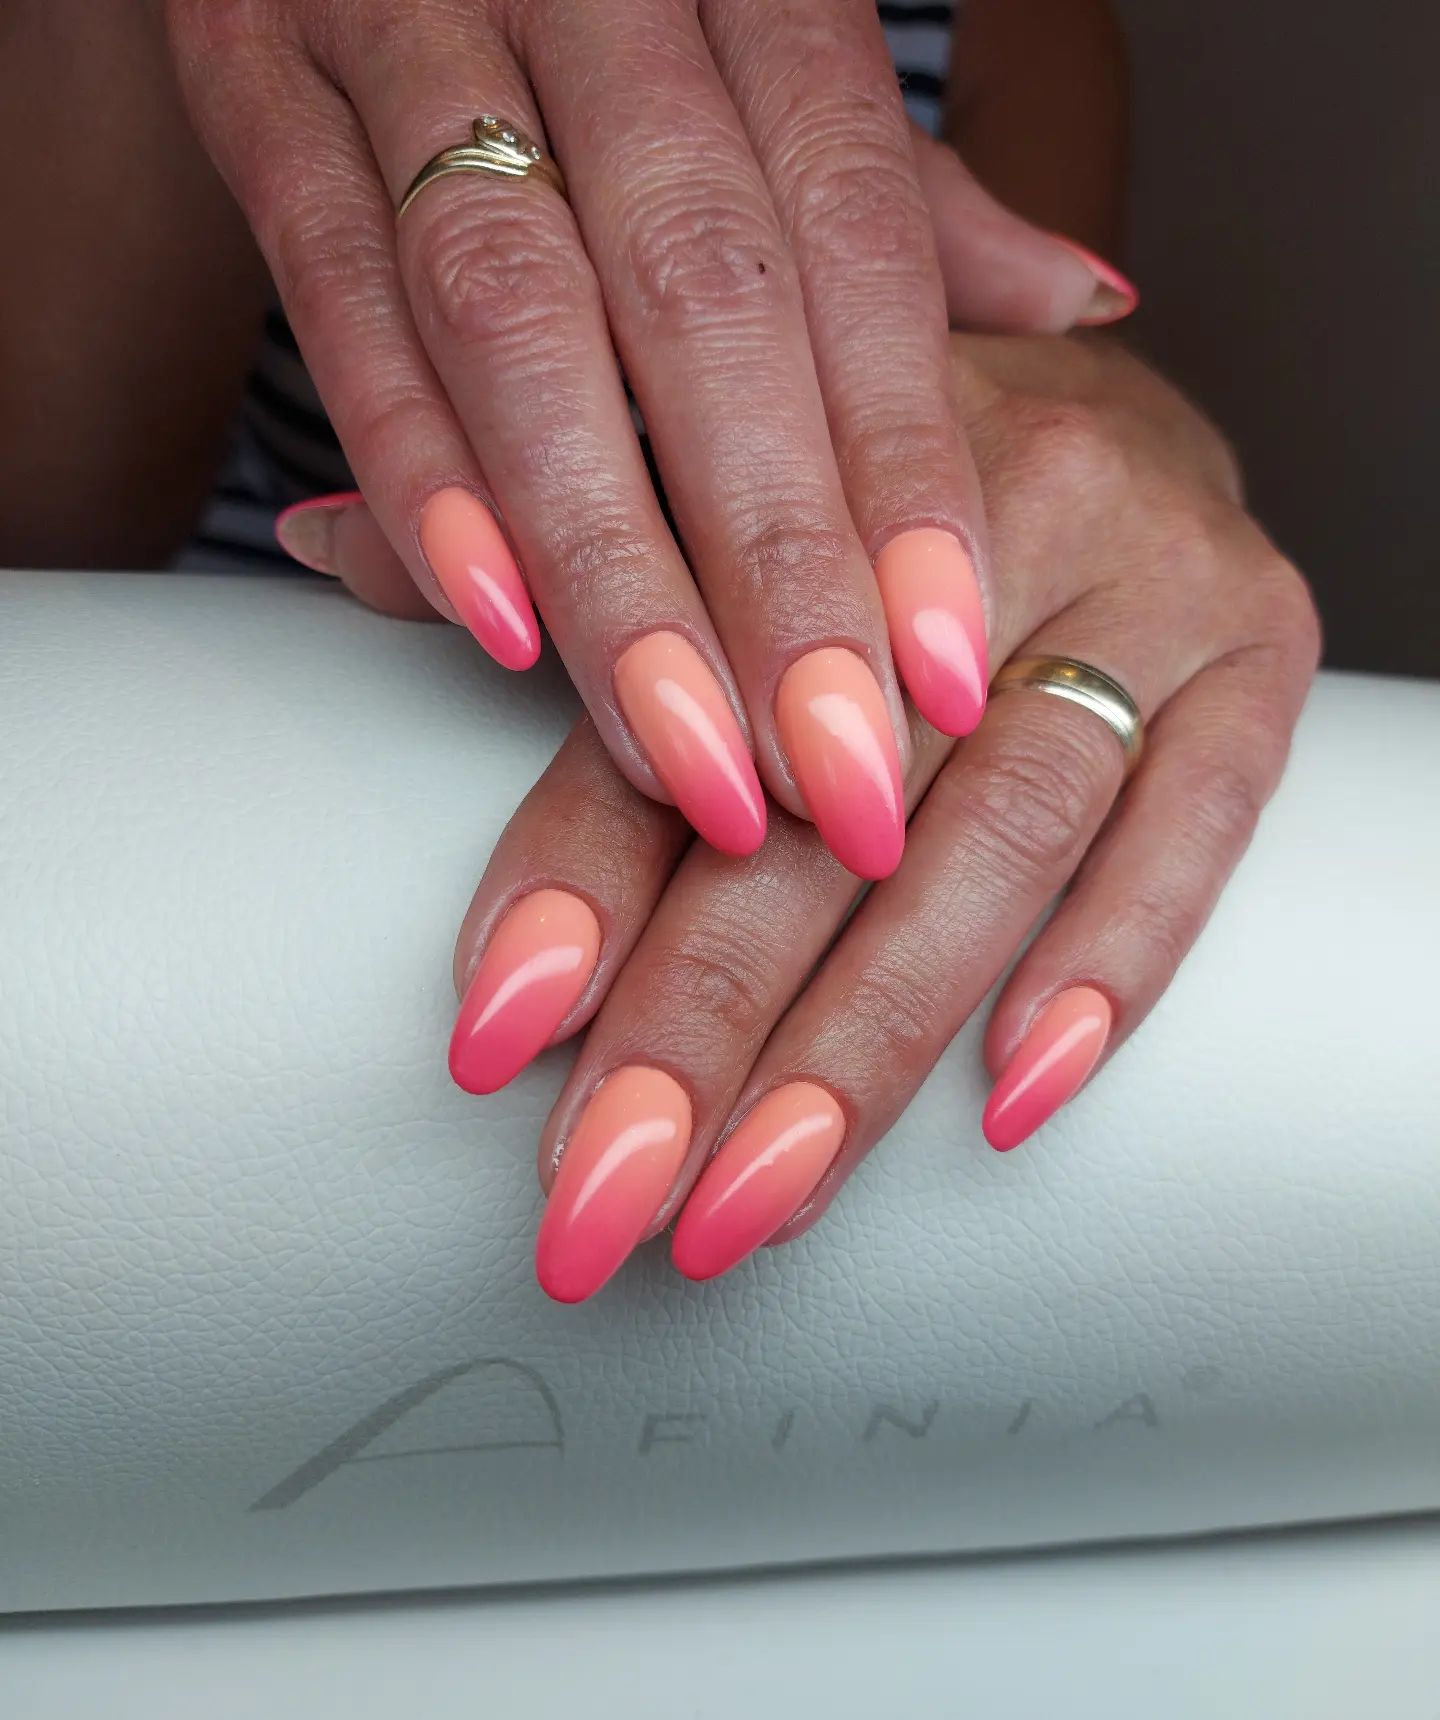 An orange and pink color combo that you’re going to enjoy fully for the summertime! These nails will look so good on younger and teen women who enjoy bright and stylish nails.